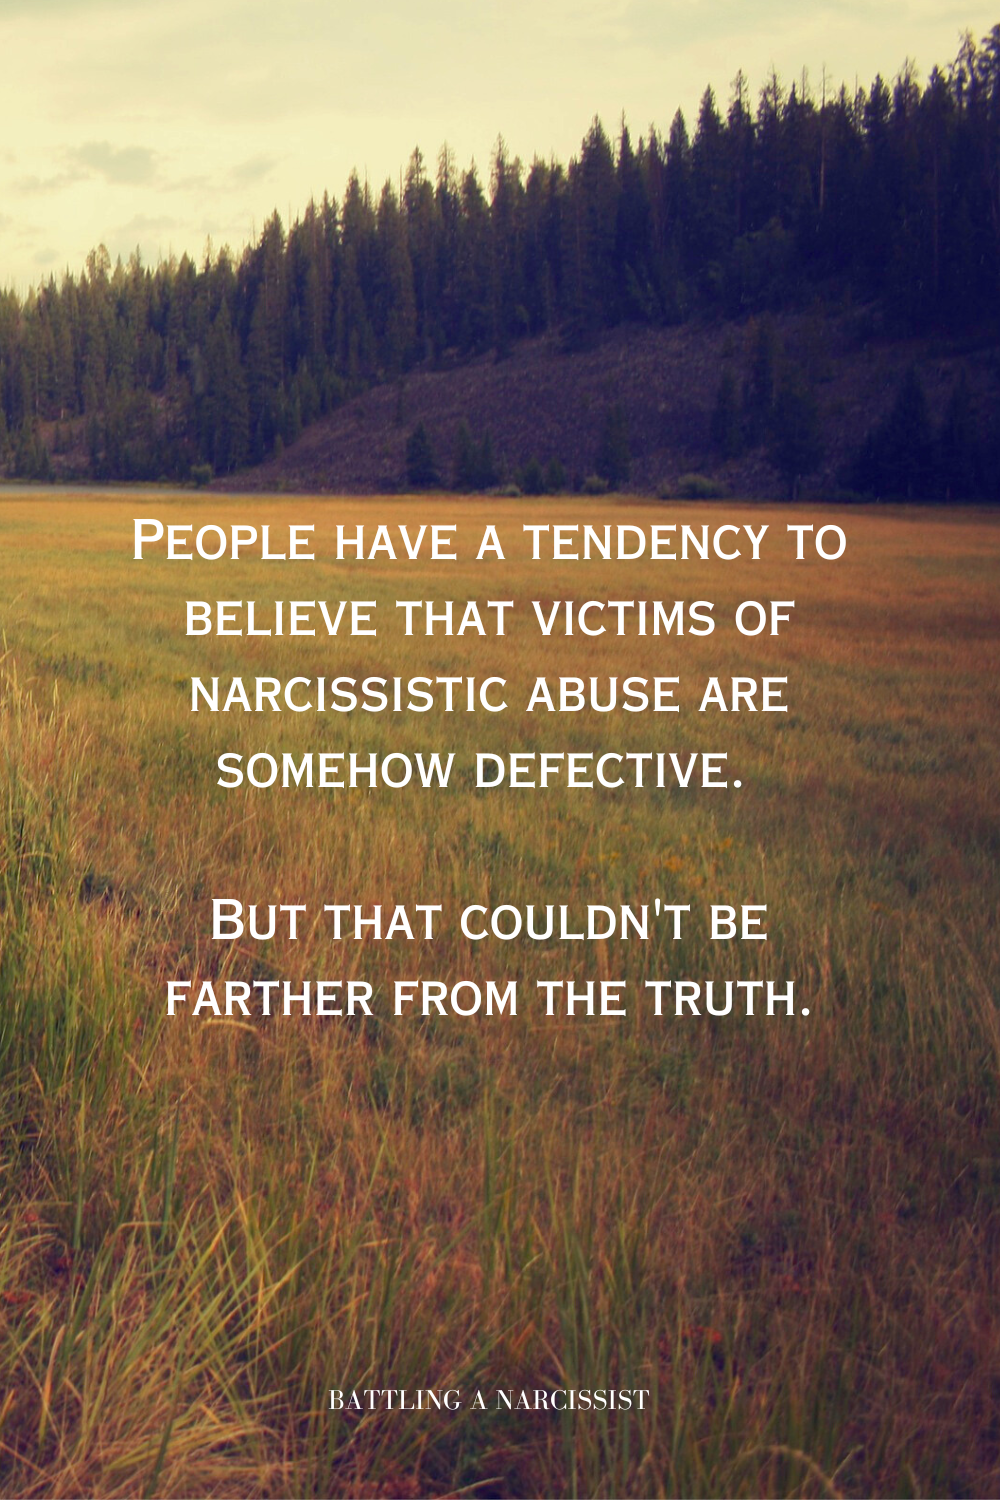 People have a tendency to believe that victims of narcissistic abuse are somehow defective. 

But that couldn't be farther from the truth.